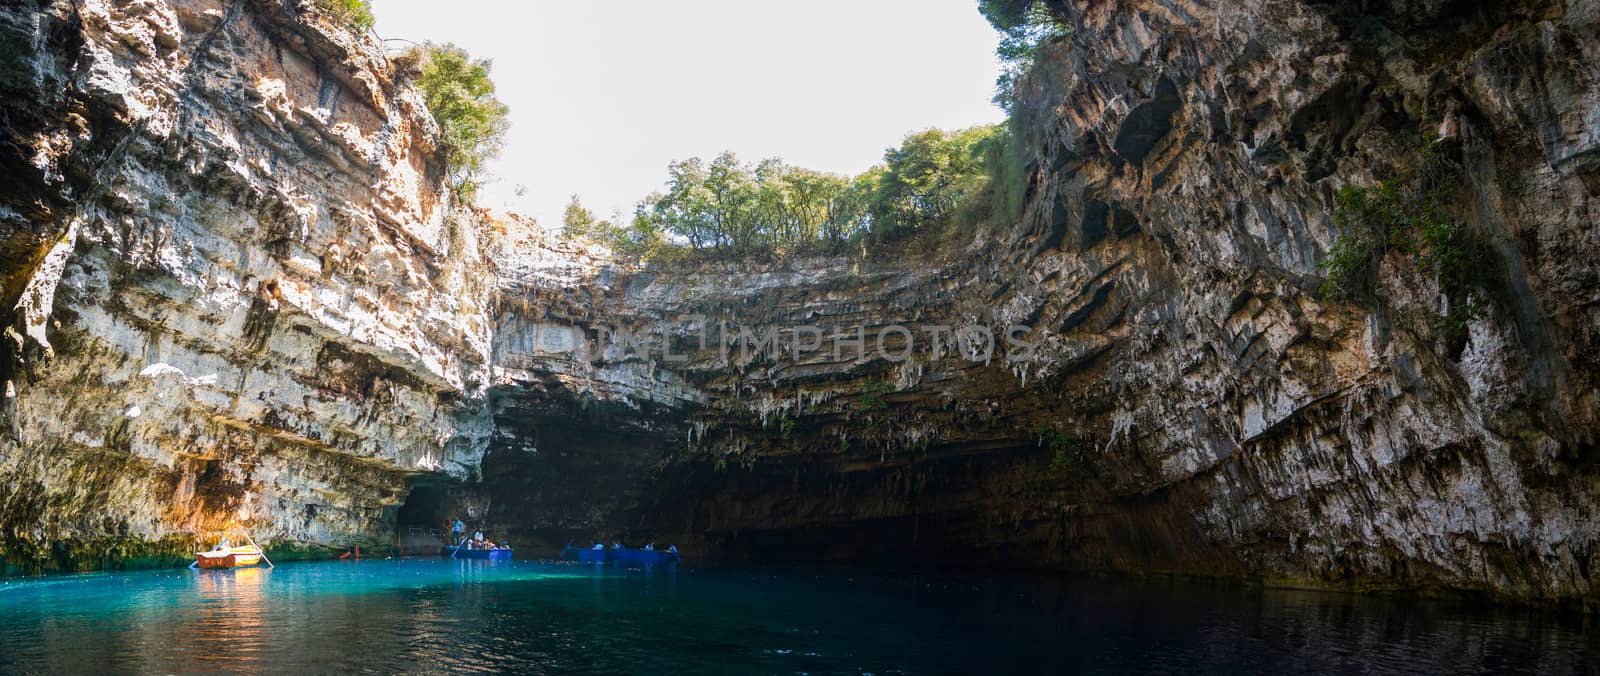 tourists from europe enjoy the atmosphere of this unique cave called melissani in the island of kefalonia, August 1st 2015, Greece